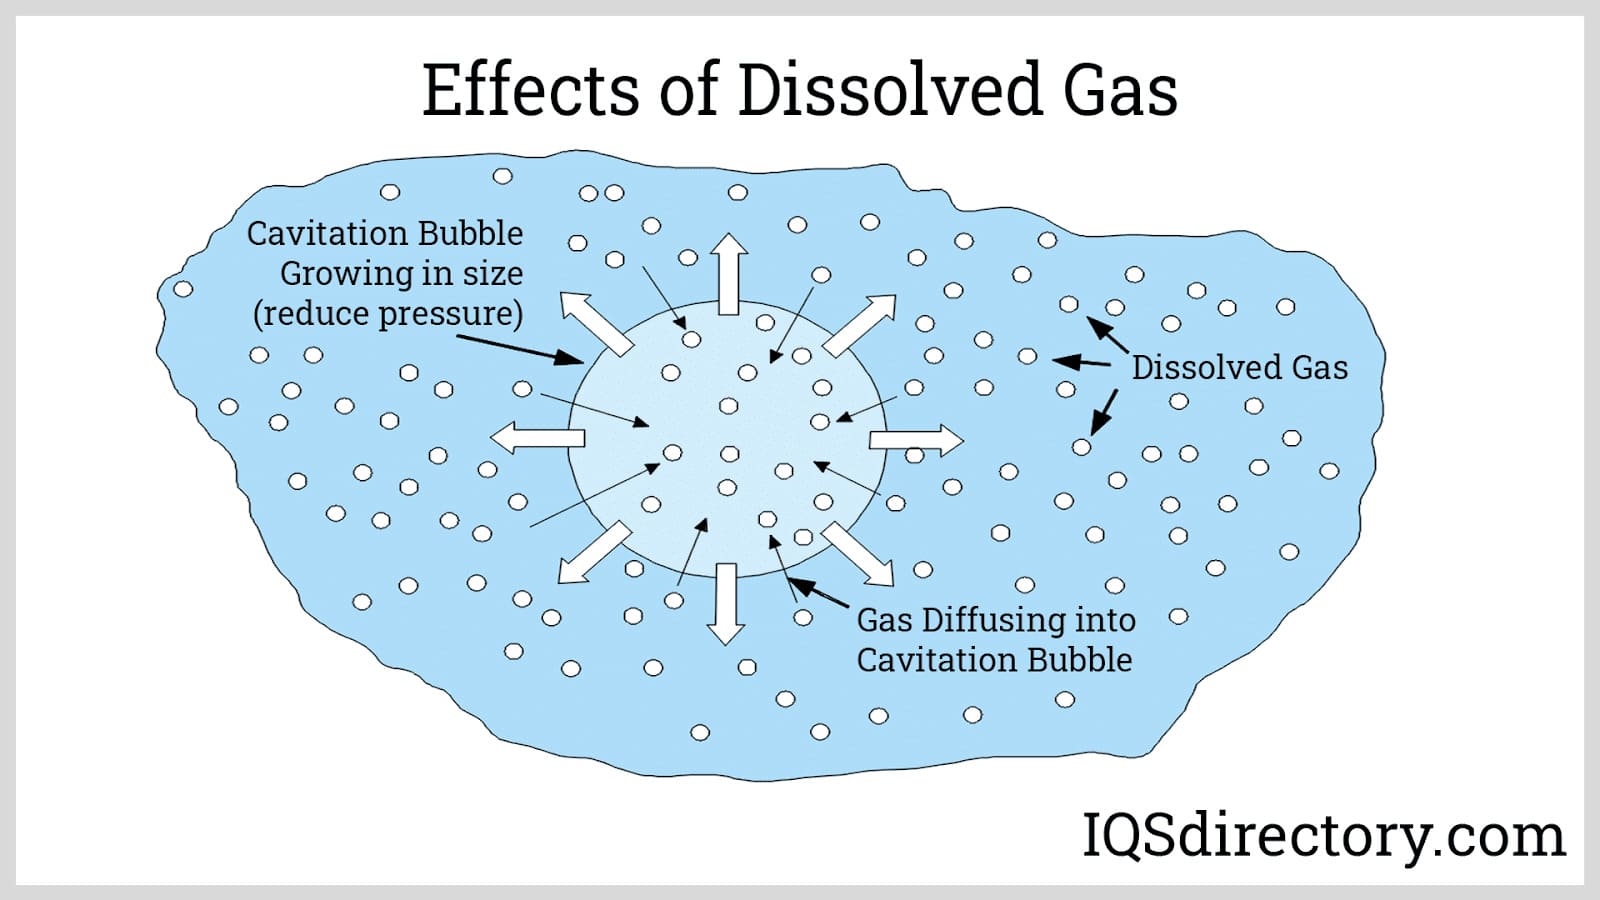 Effects of Dissolved Gas